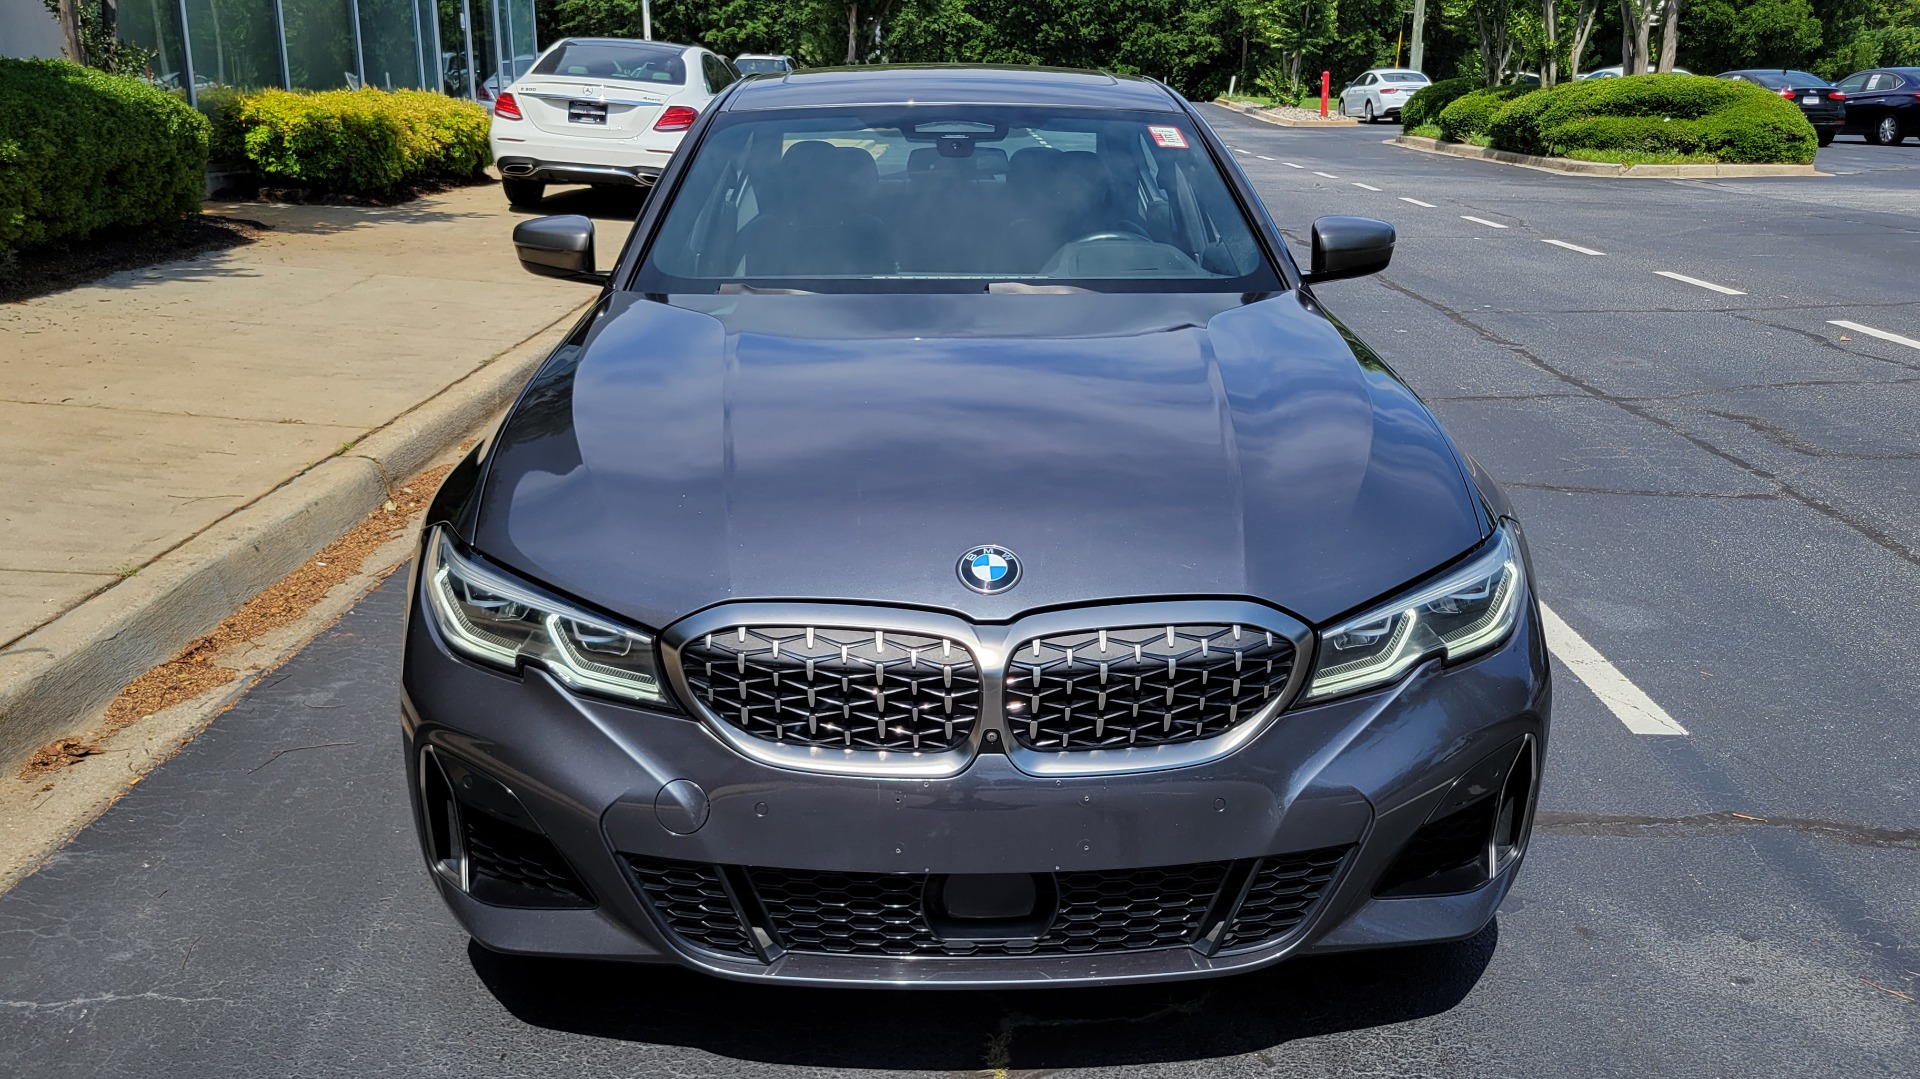 Used 2020 BMW 3 SERIES M340I XDRIVE / PREMIUM / DRVR ASST / H/K SND / REARVIEW for sale $49,595 at Formula Imports in Charlotte NC 28227 10